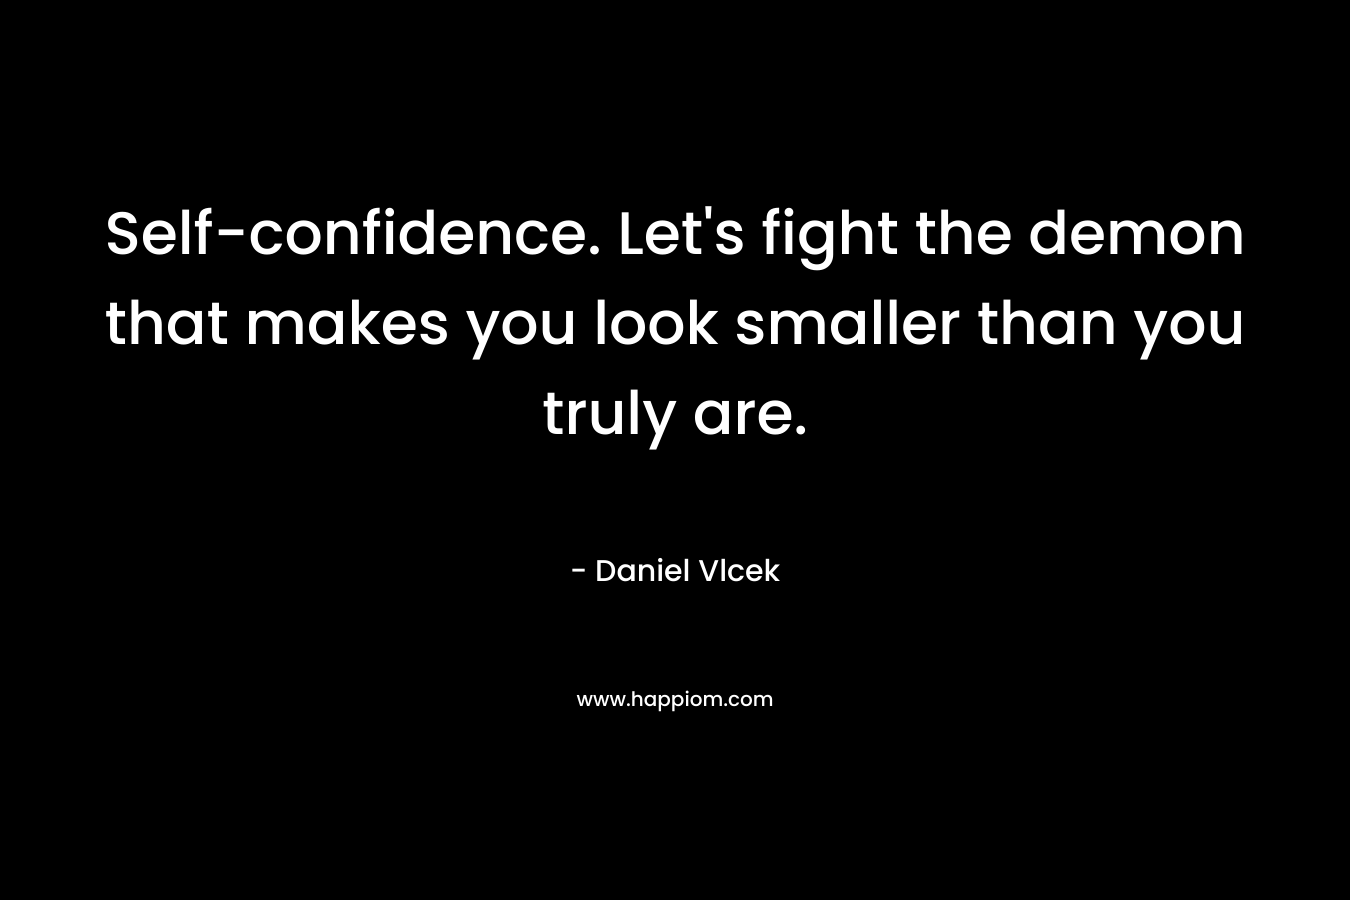 Self-confidence. Let’s fight the demon that makes you look smaller than you truly are. – Daniel Vlcek